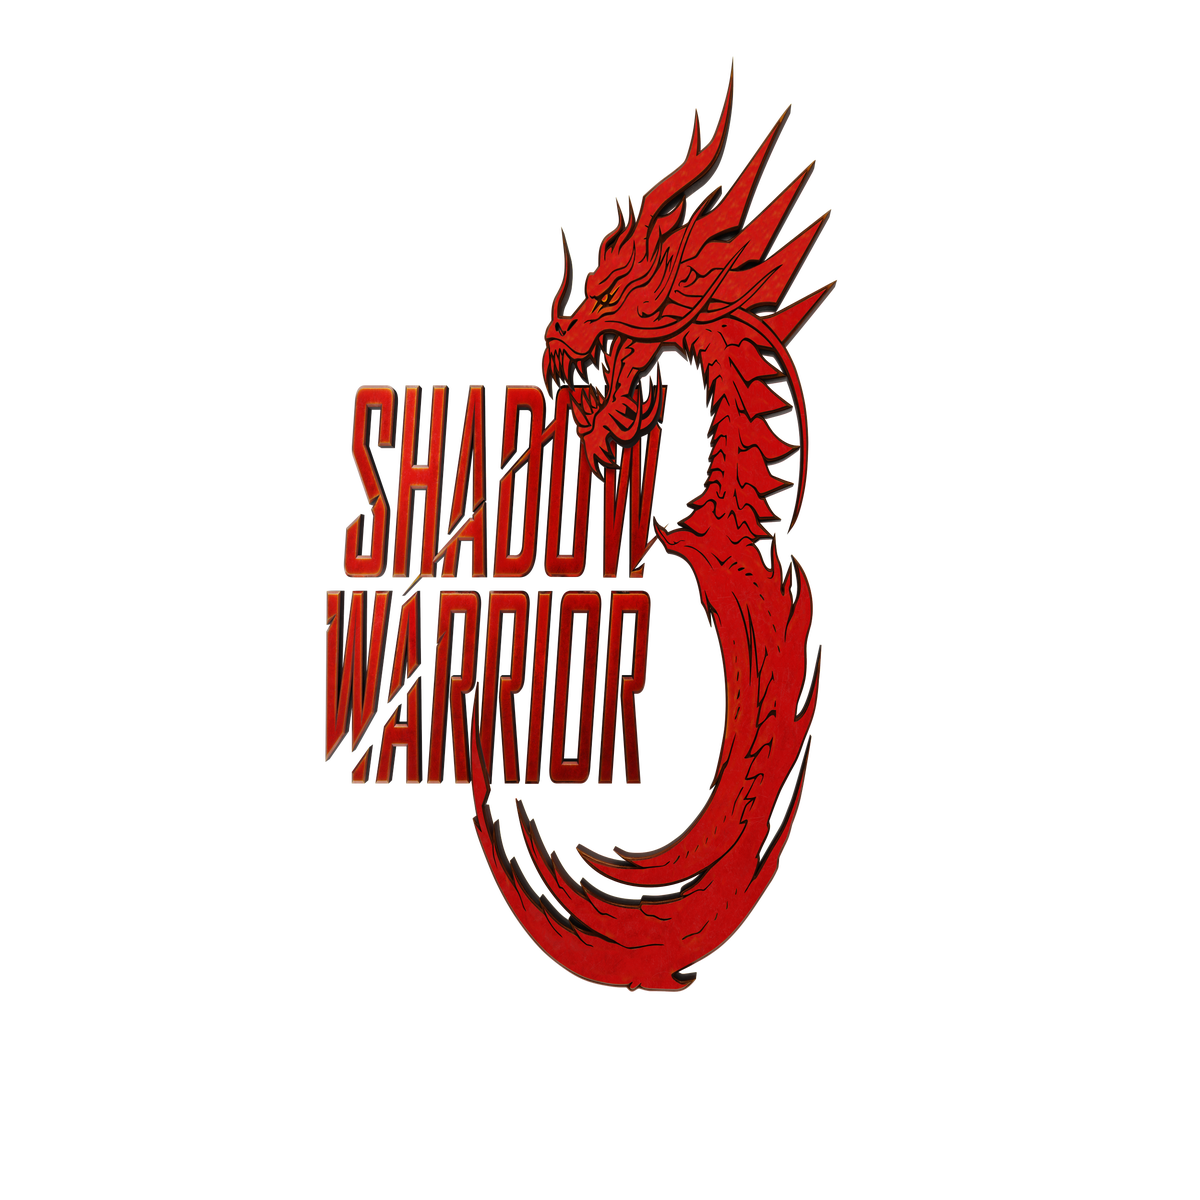 Shadow Warrior 3 gameplay reveal set for July 11